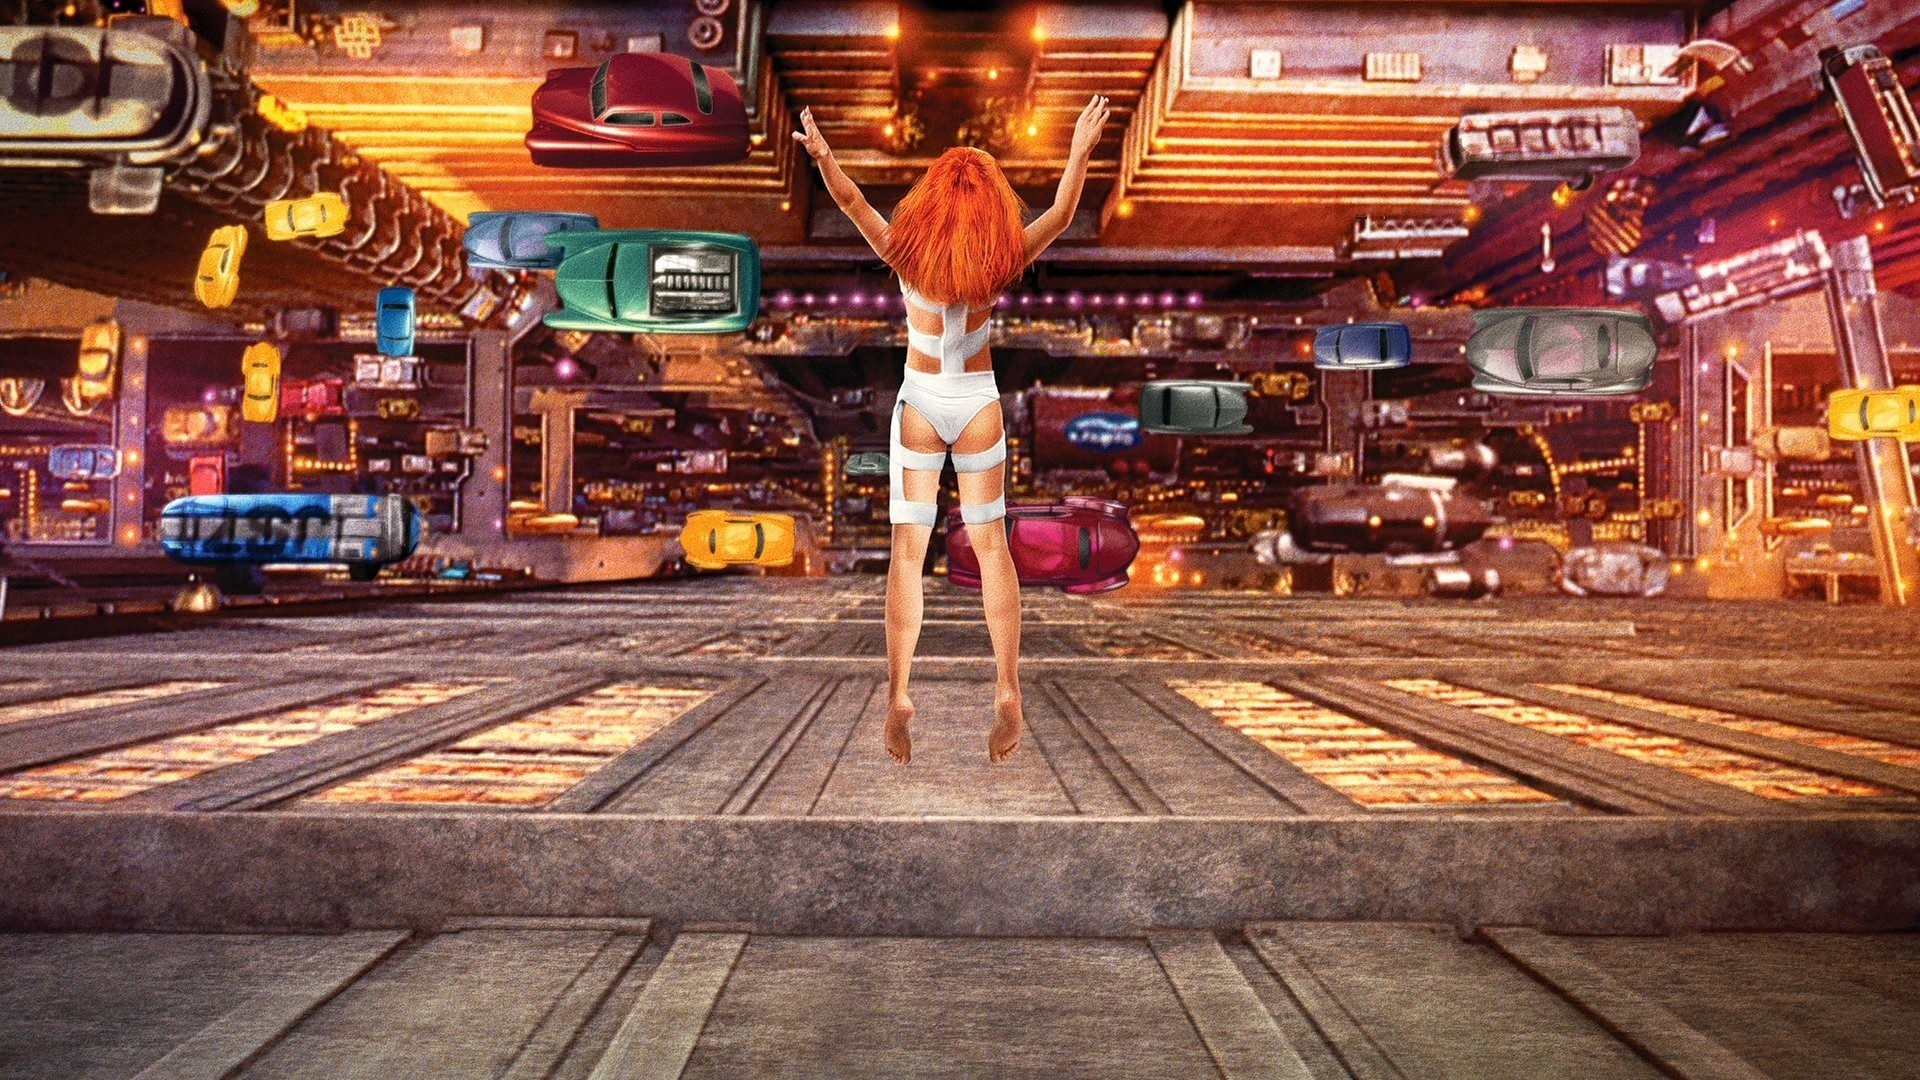 General 1920x1080 The Fifth Element movies Milla Jovovich  science fiction Luc Besson futuristic city Leeloo women jumping flying car